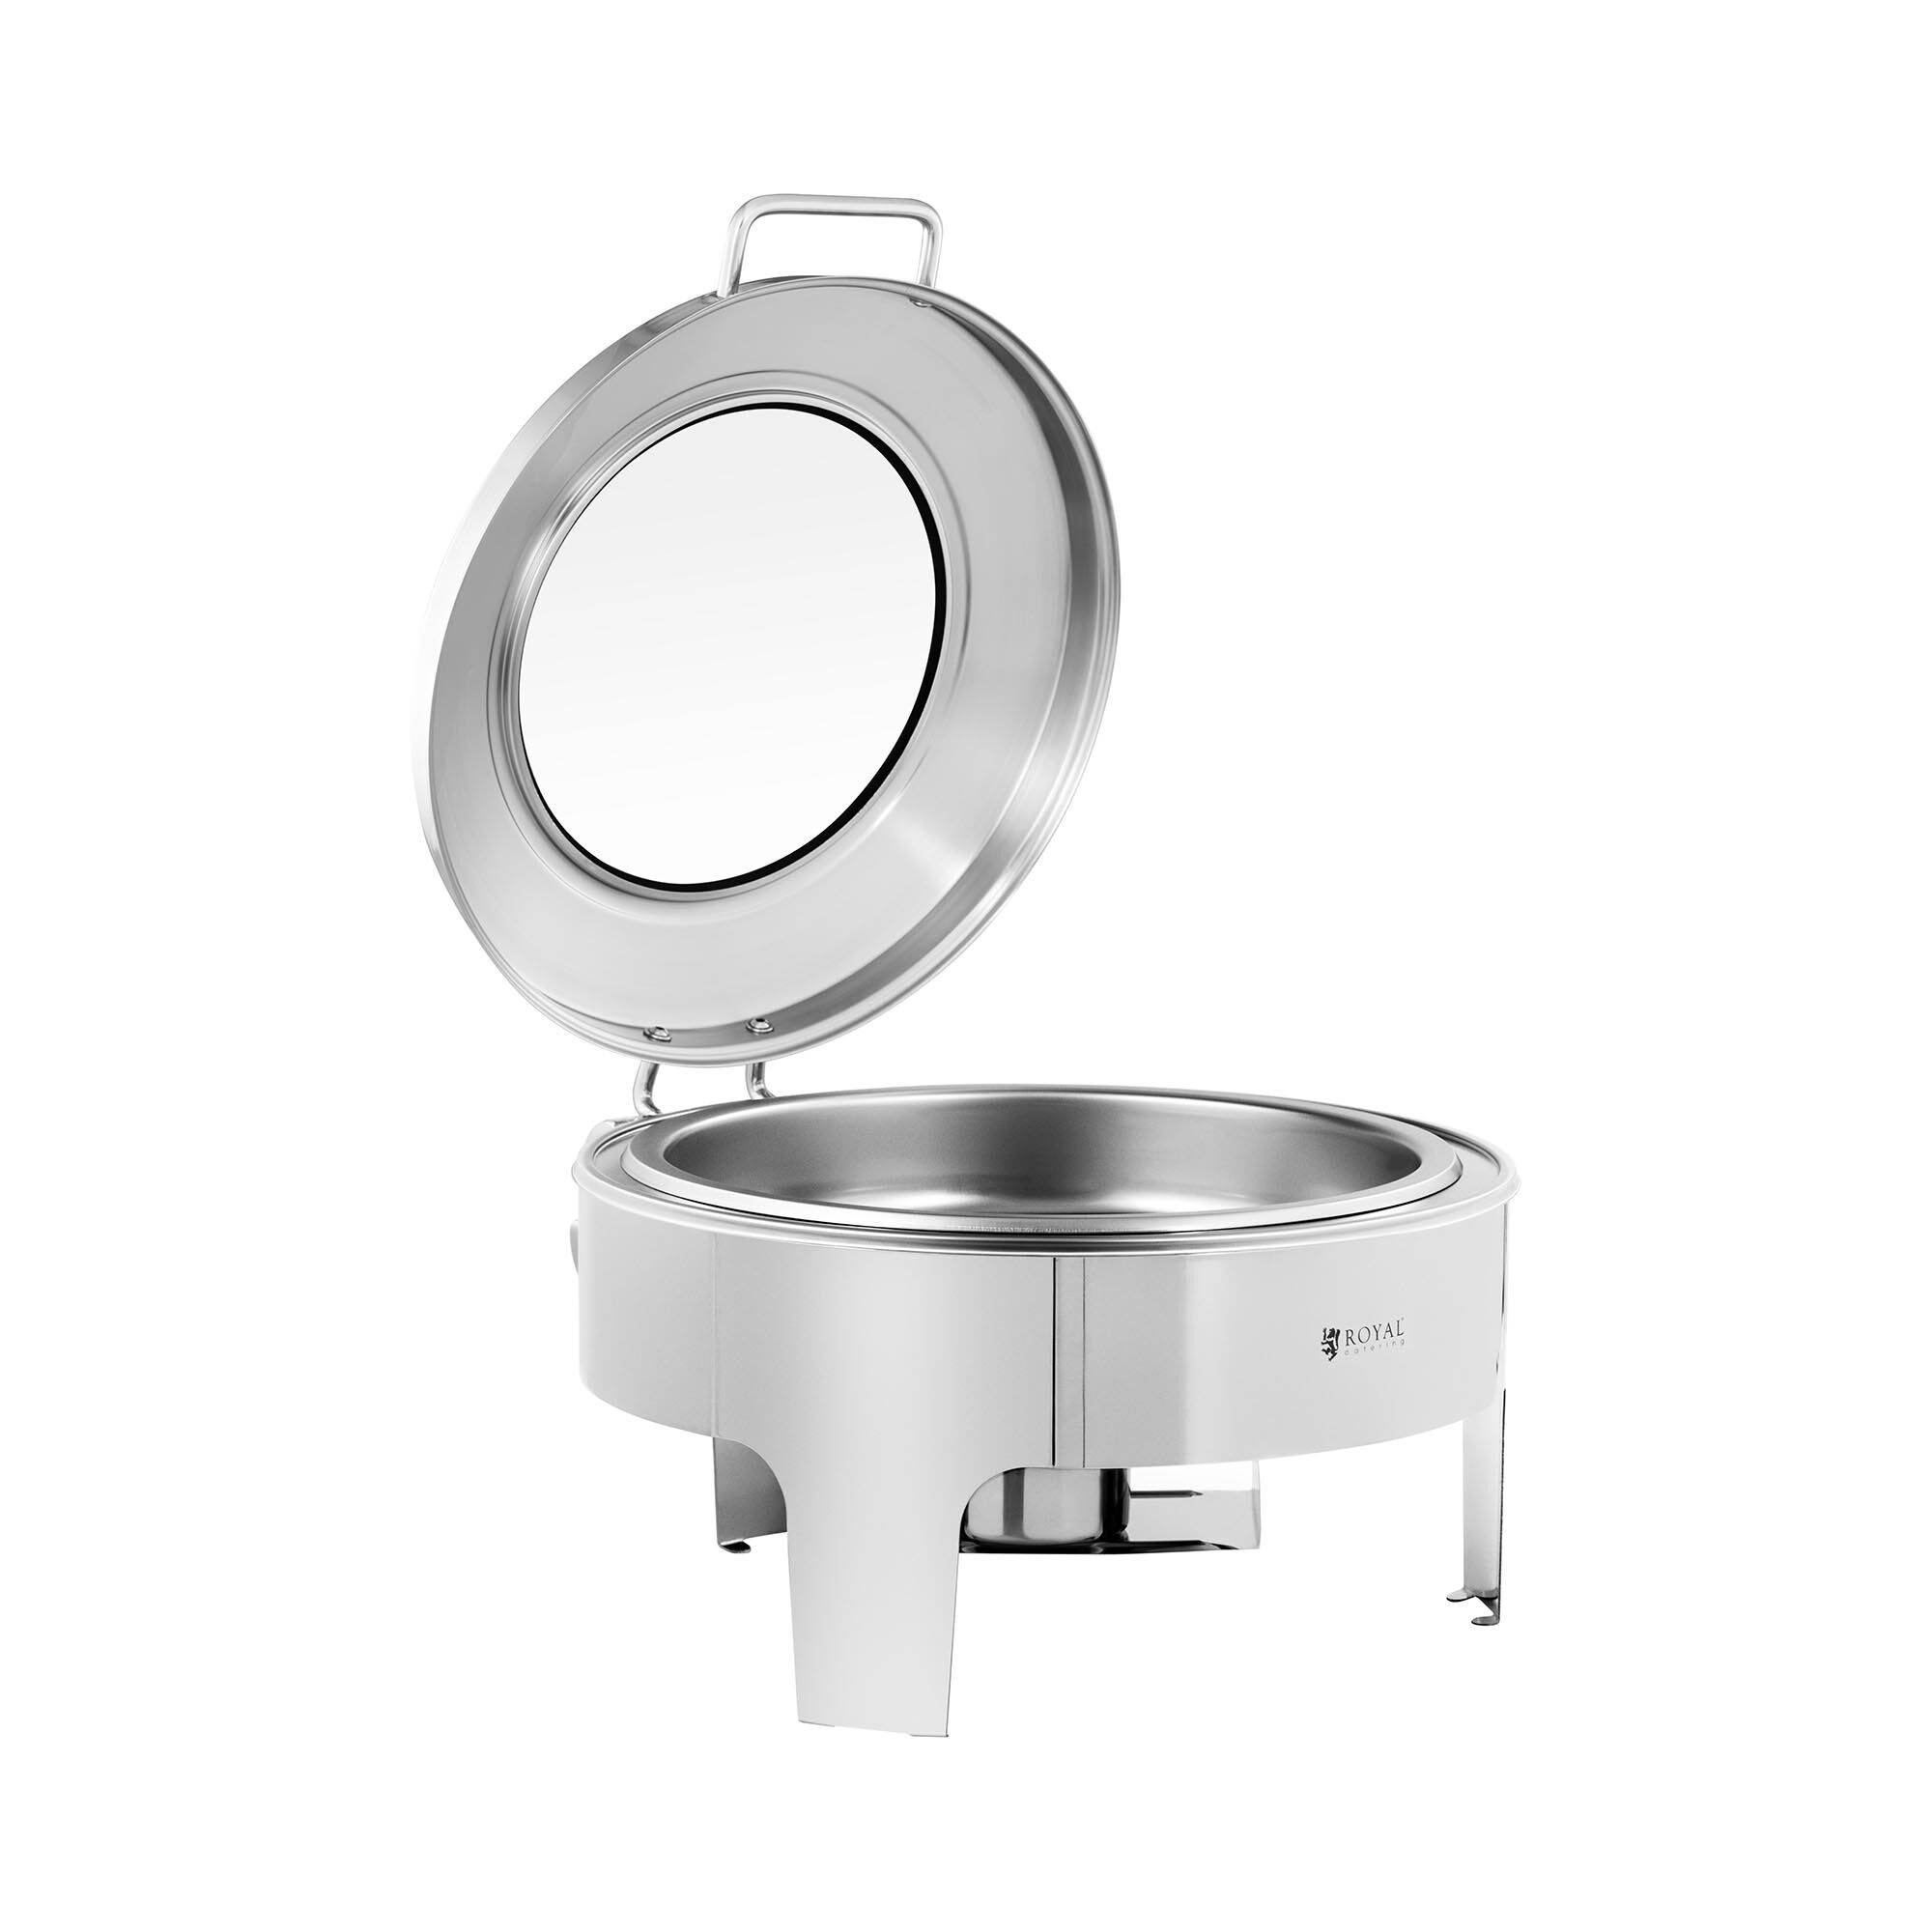 Royal Catering Chafing Dish - round - Royal Catering - 5.8 L - 1 fuel cell - viewing window